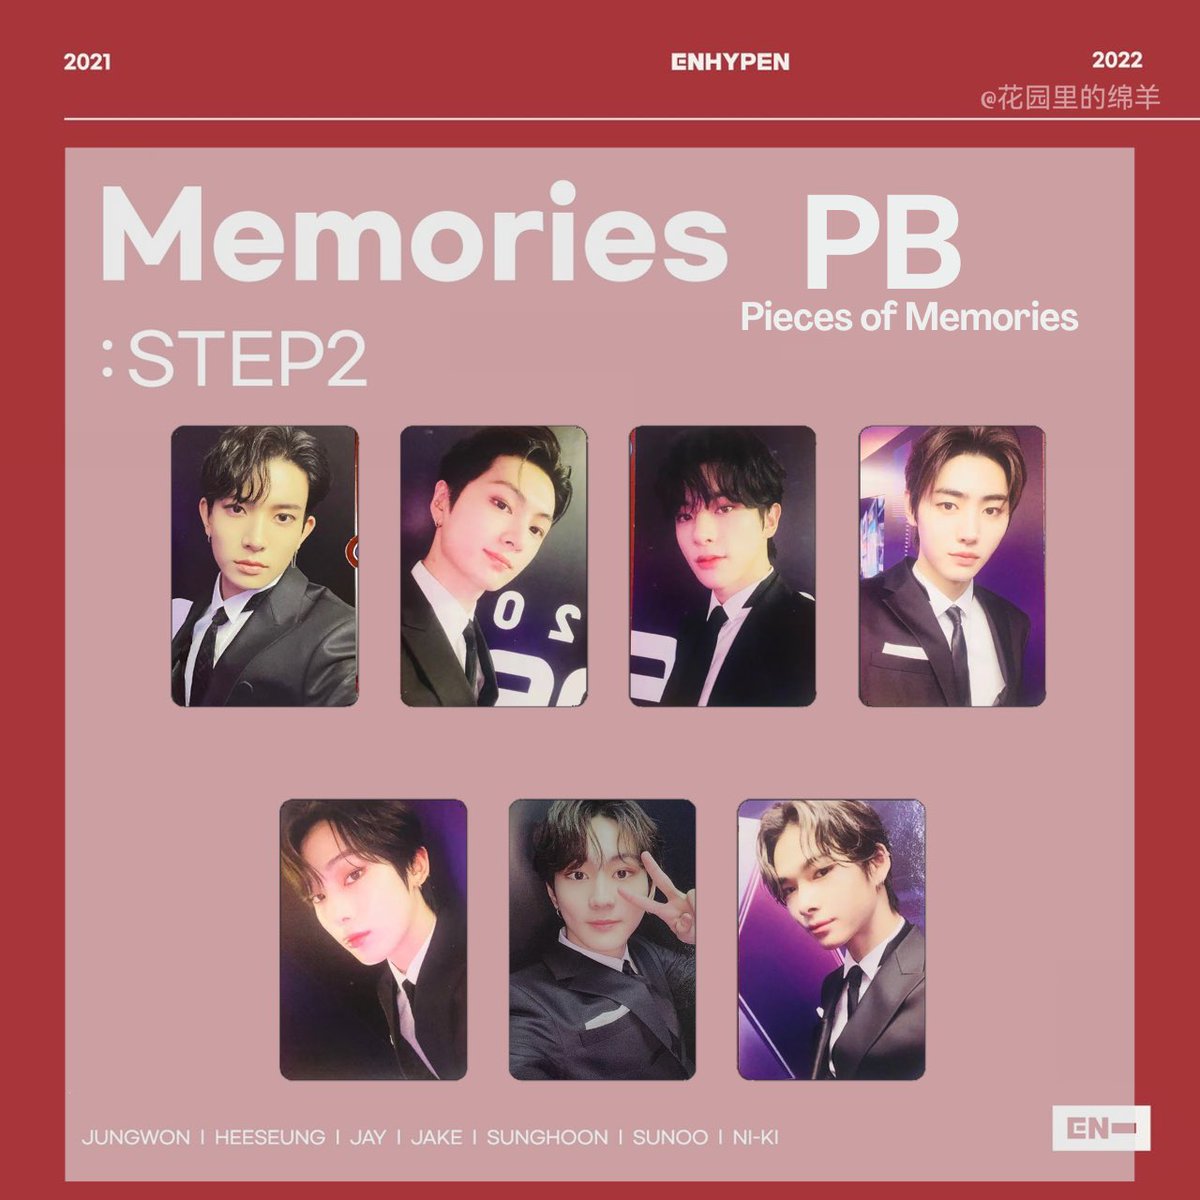 Enhypen [MEMORIES: Step 2] Pieces of Memories Version Photocard Template 

Jungwon Heeseung Jay Jake Sunghoon Sunoo Niki 
#ENHYPEN #MEMORIES_STEP2
 
ctto.
‼️photo credits to original owners‼️